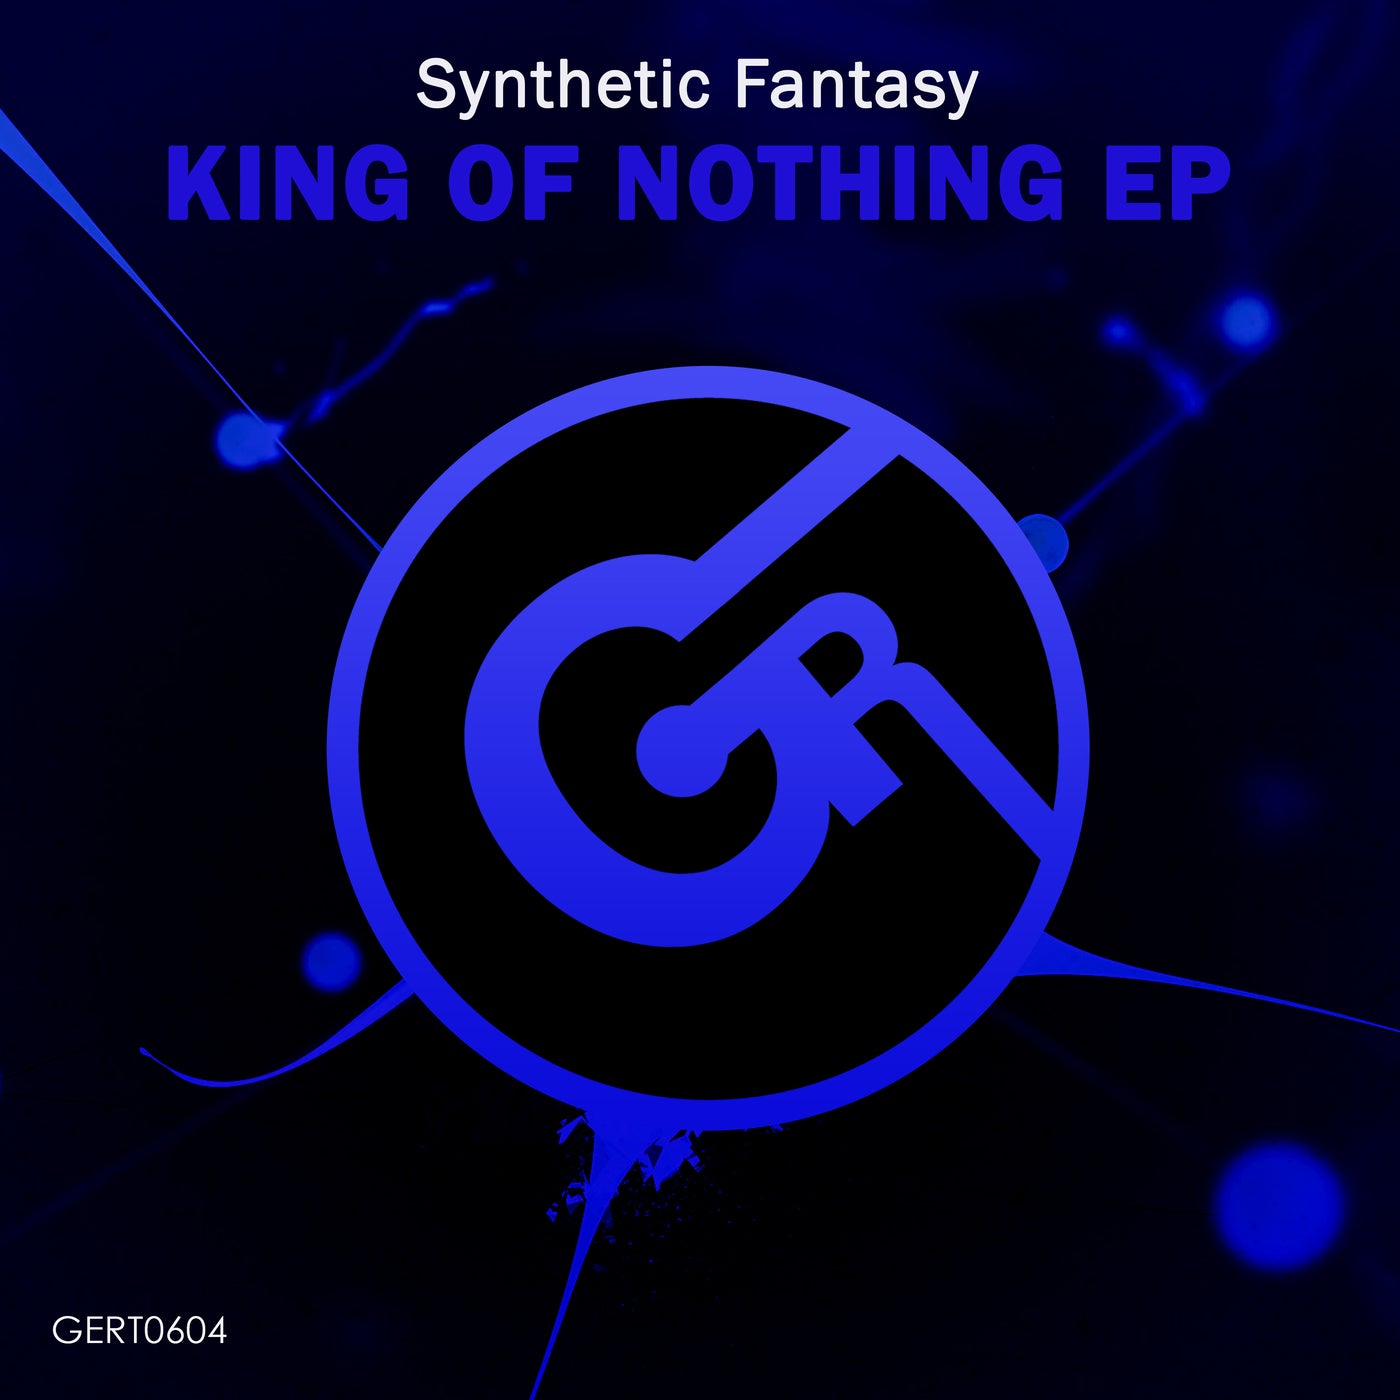 King Of Nothing EP